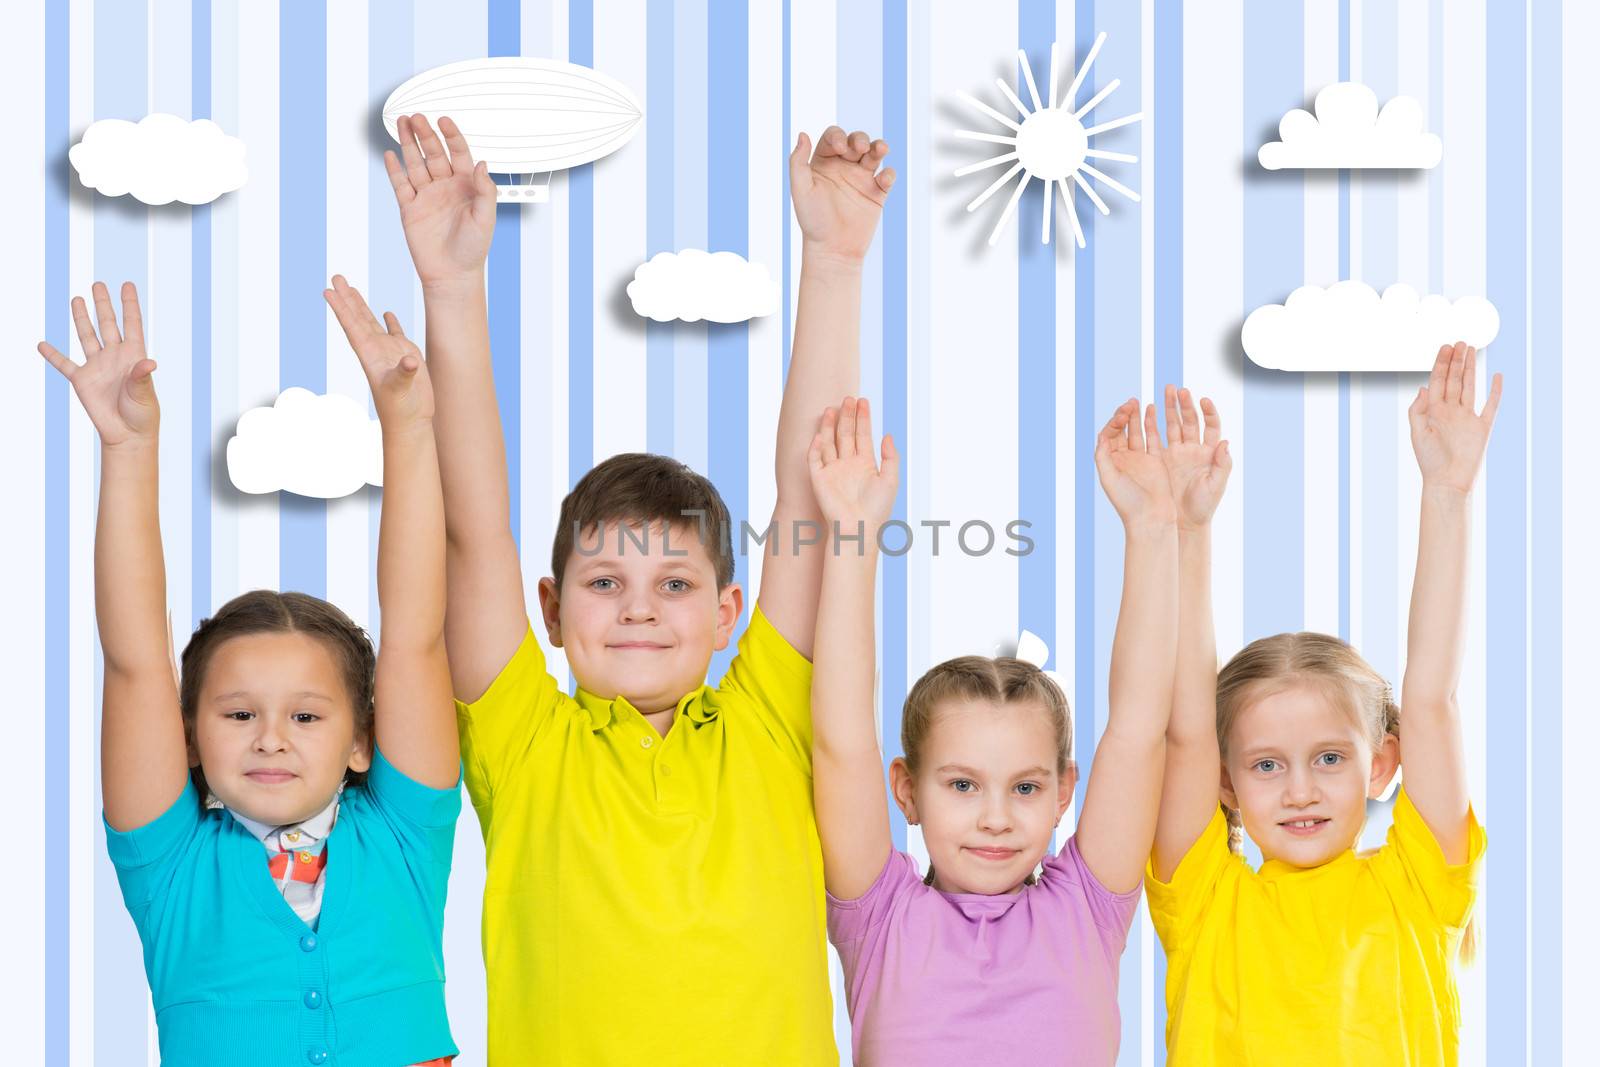 children in a row, hands up. behind painted background